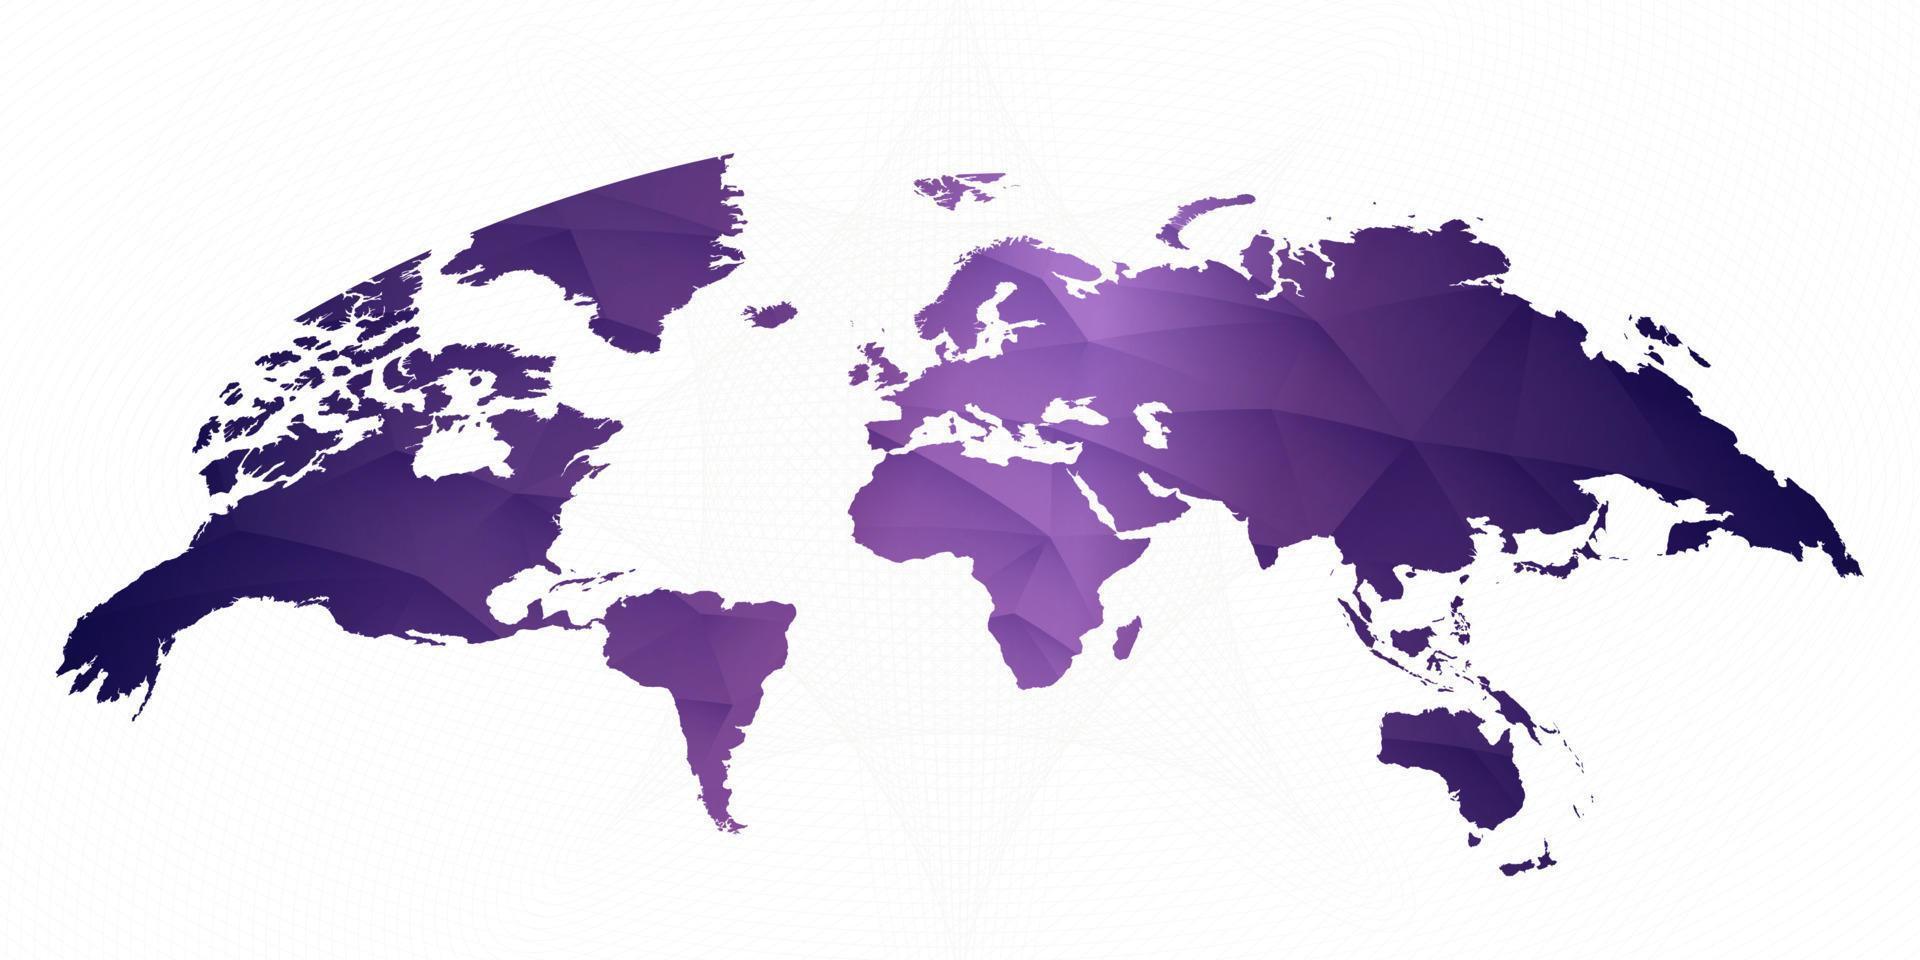 World map on abstract lined background in Gradient Ultra Violet Color. vector